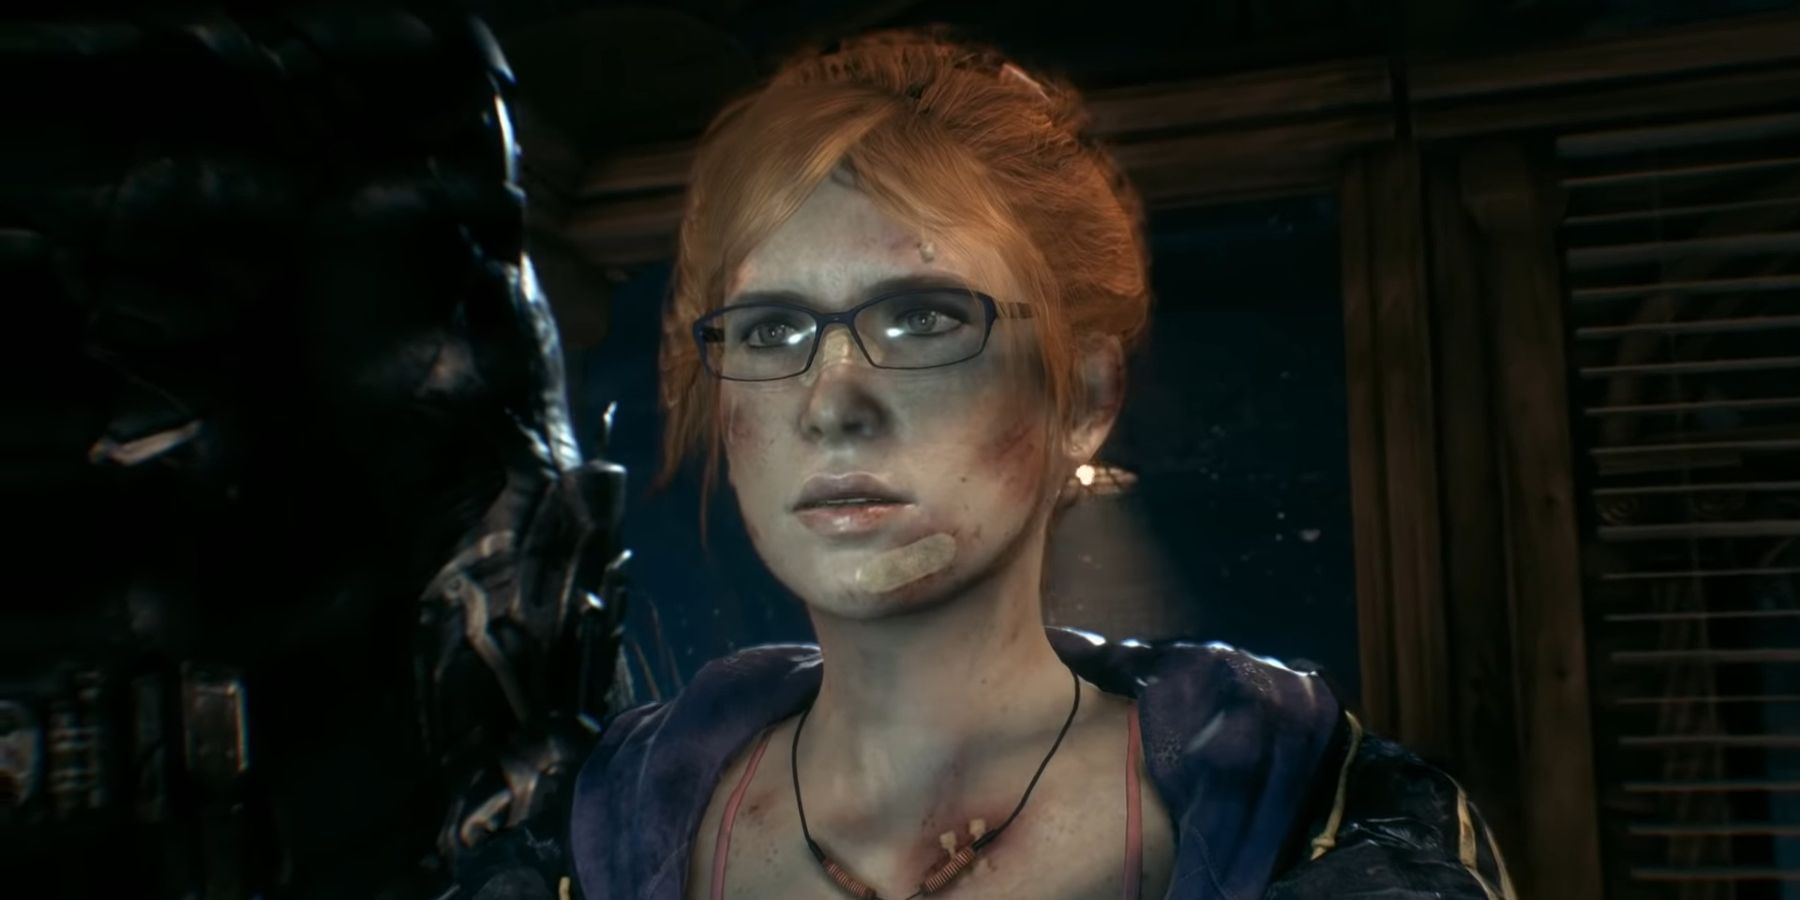 Barbara Gordon as Oracle operating from the GCPD in Batman Arkham Knight